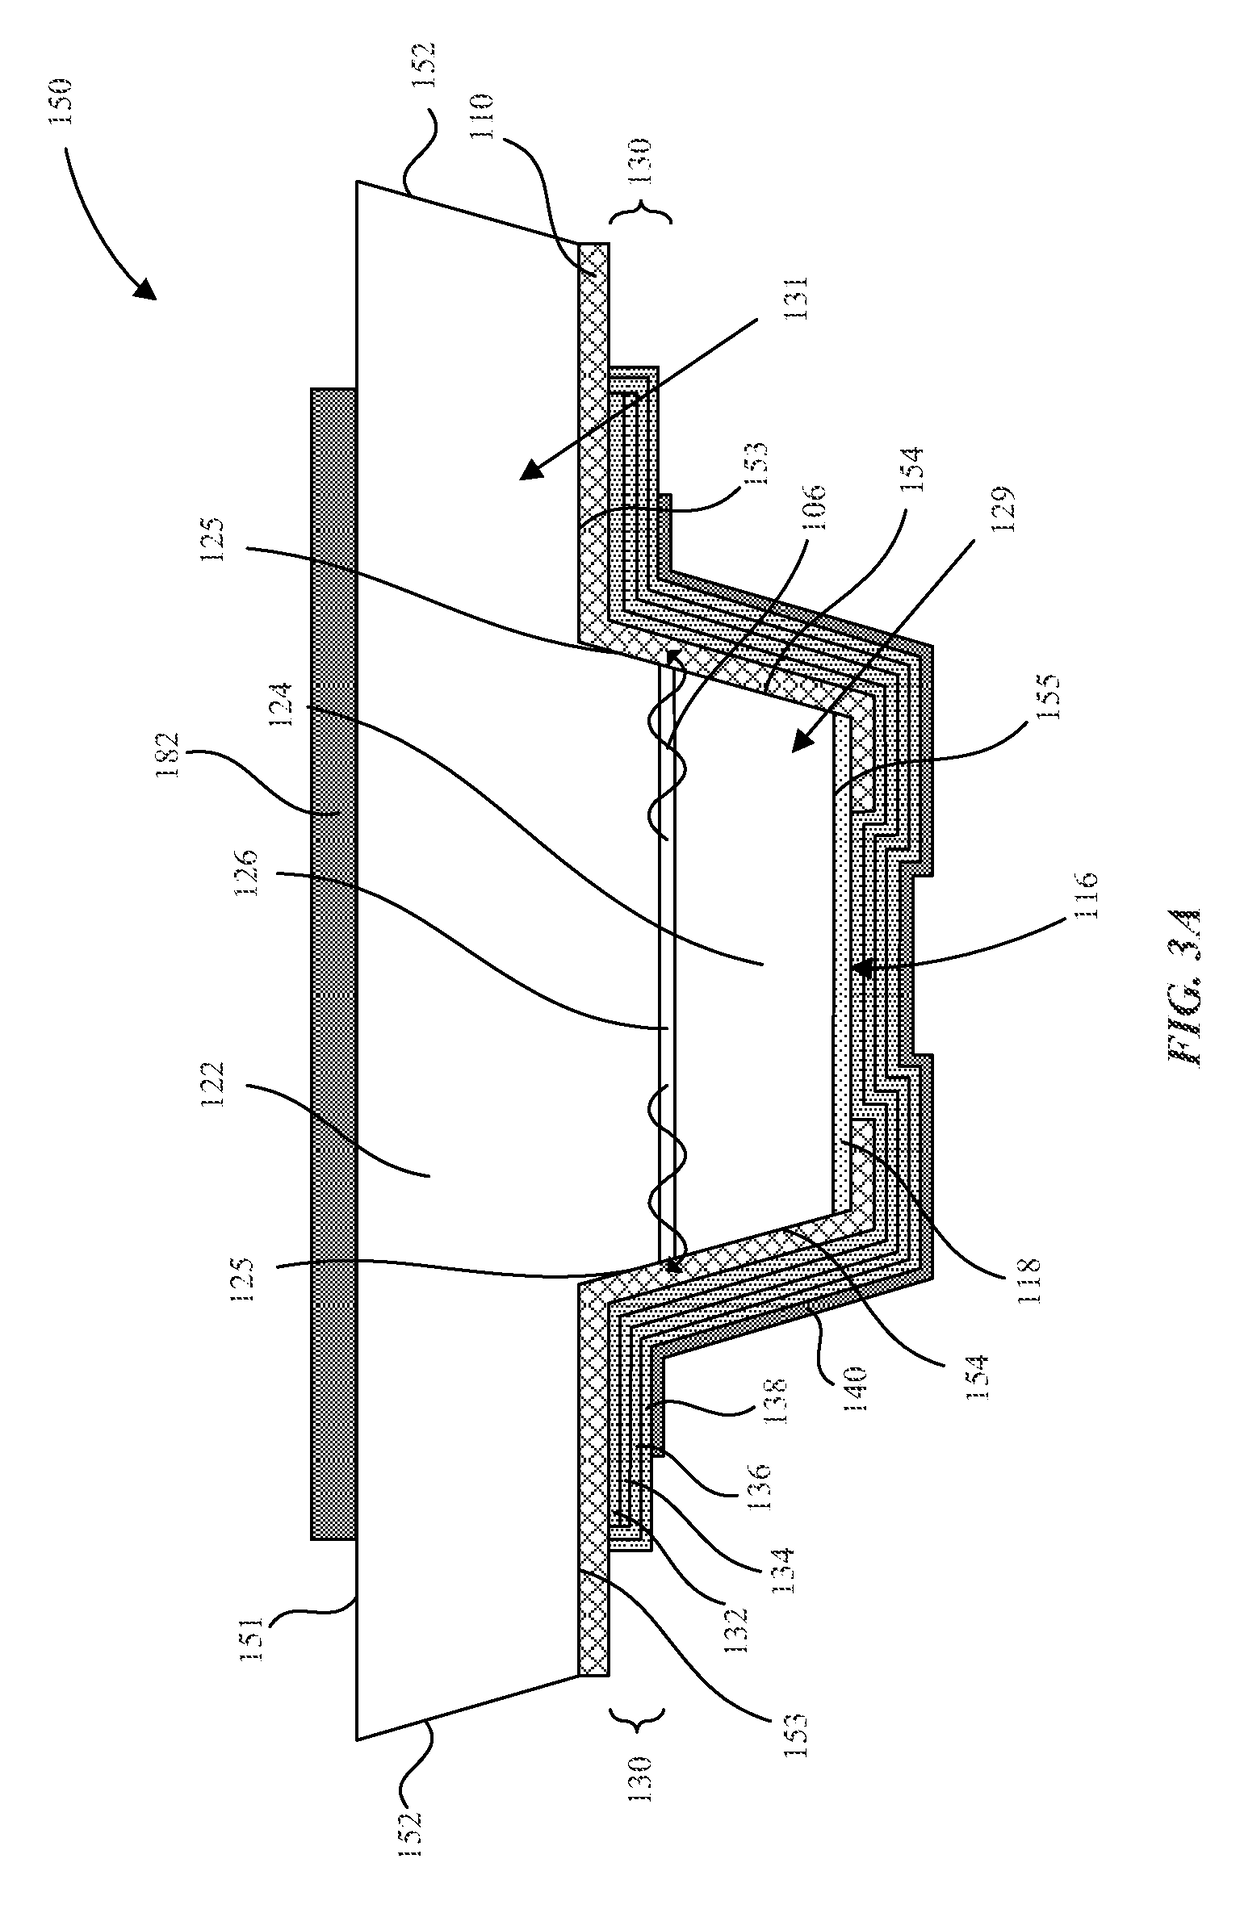 Micro-light emitting diode with metal side mirror